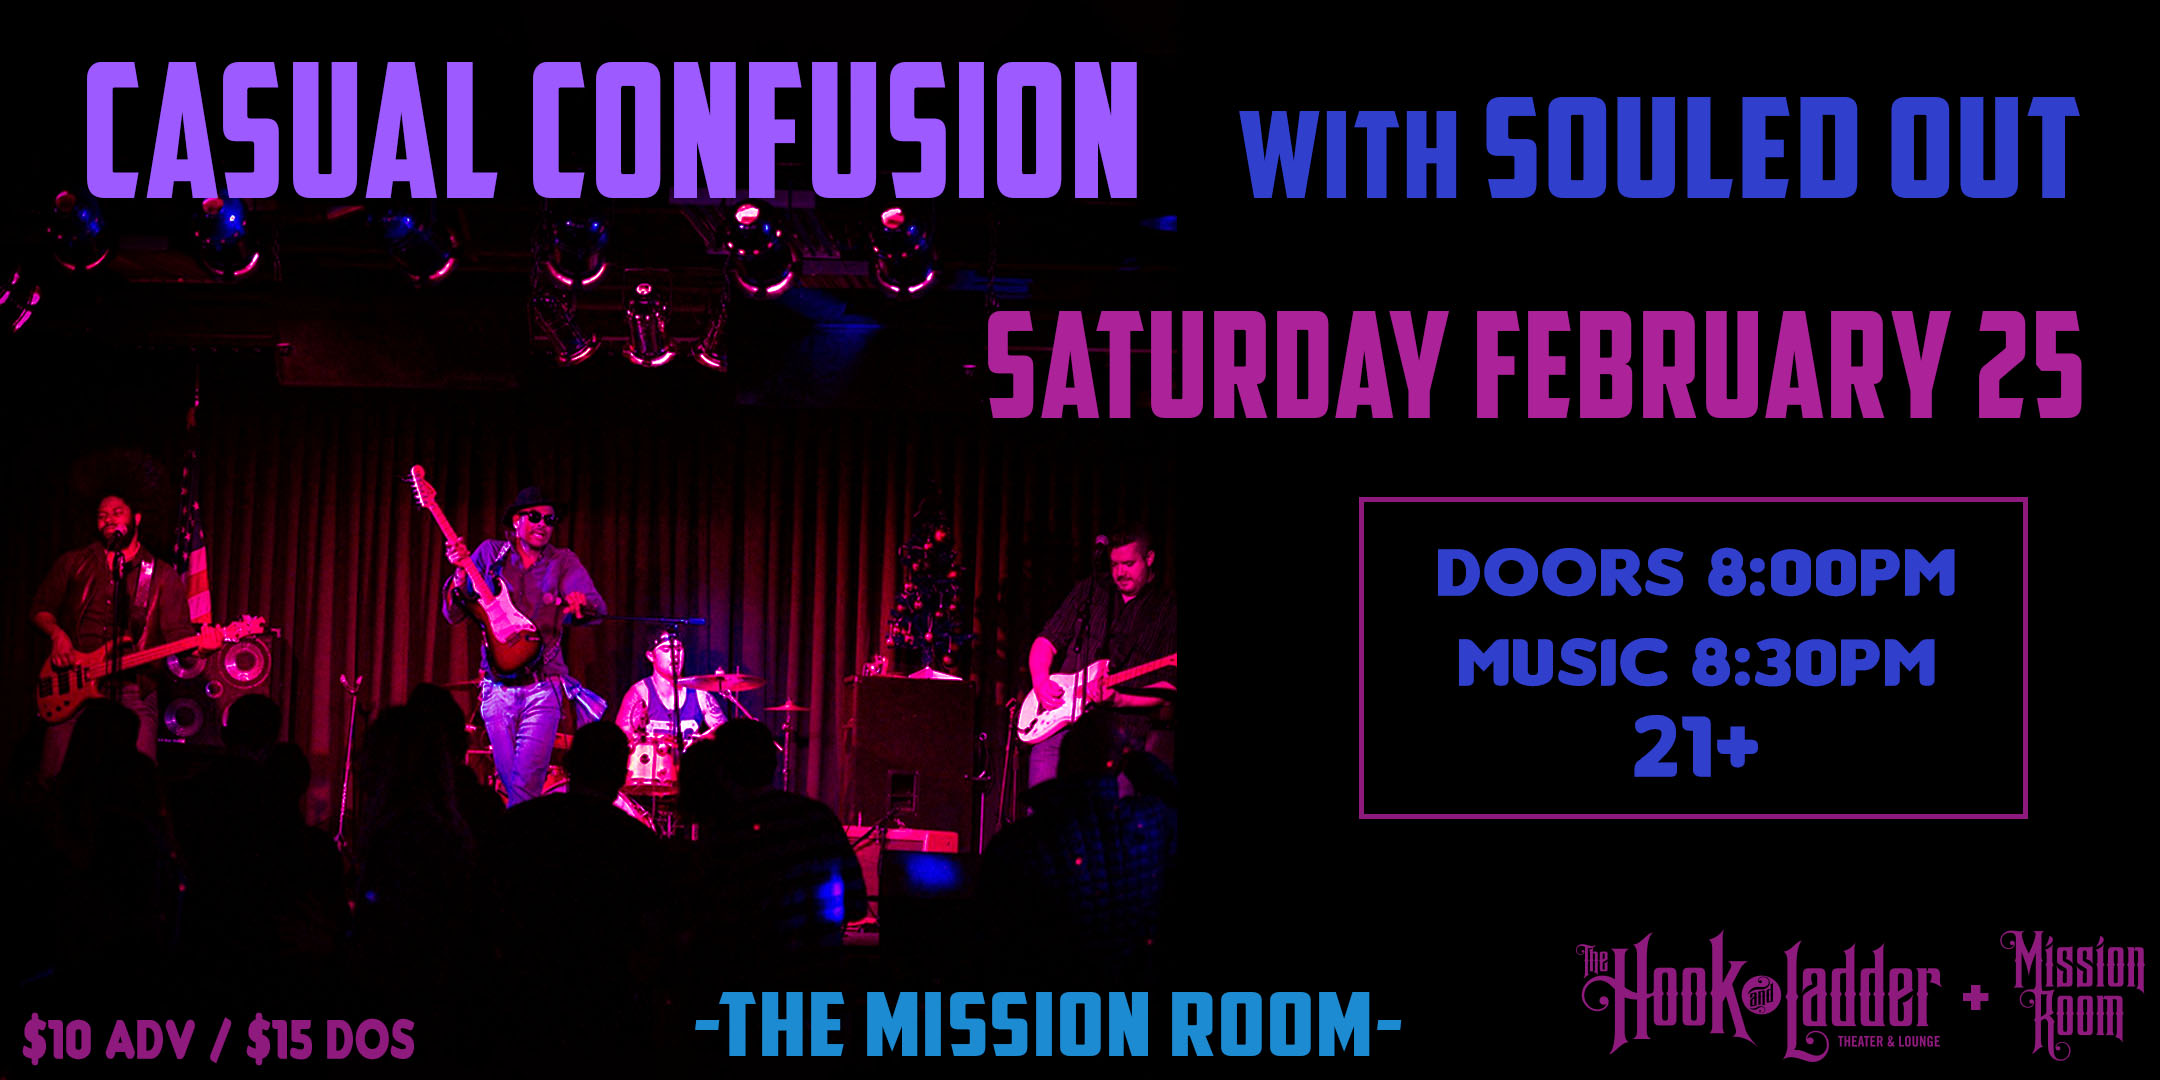 Casual Confusion with Souled Out Saturday February 25 The Mission Room at The Hook and Ladder Theater Doors 8:00pm :: Music 8:30pm :: 21+ General Admission $10 ADV / $15 DOS NO REFUNDS